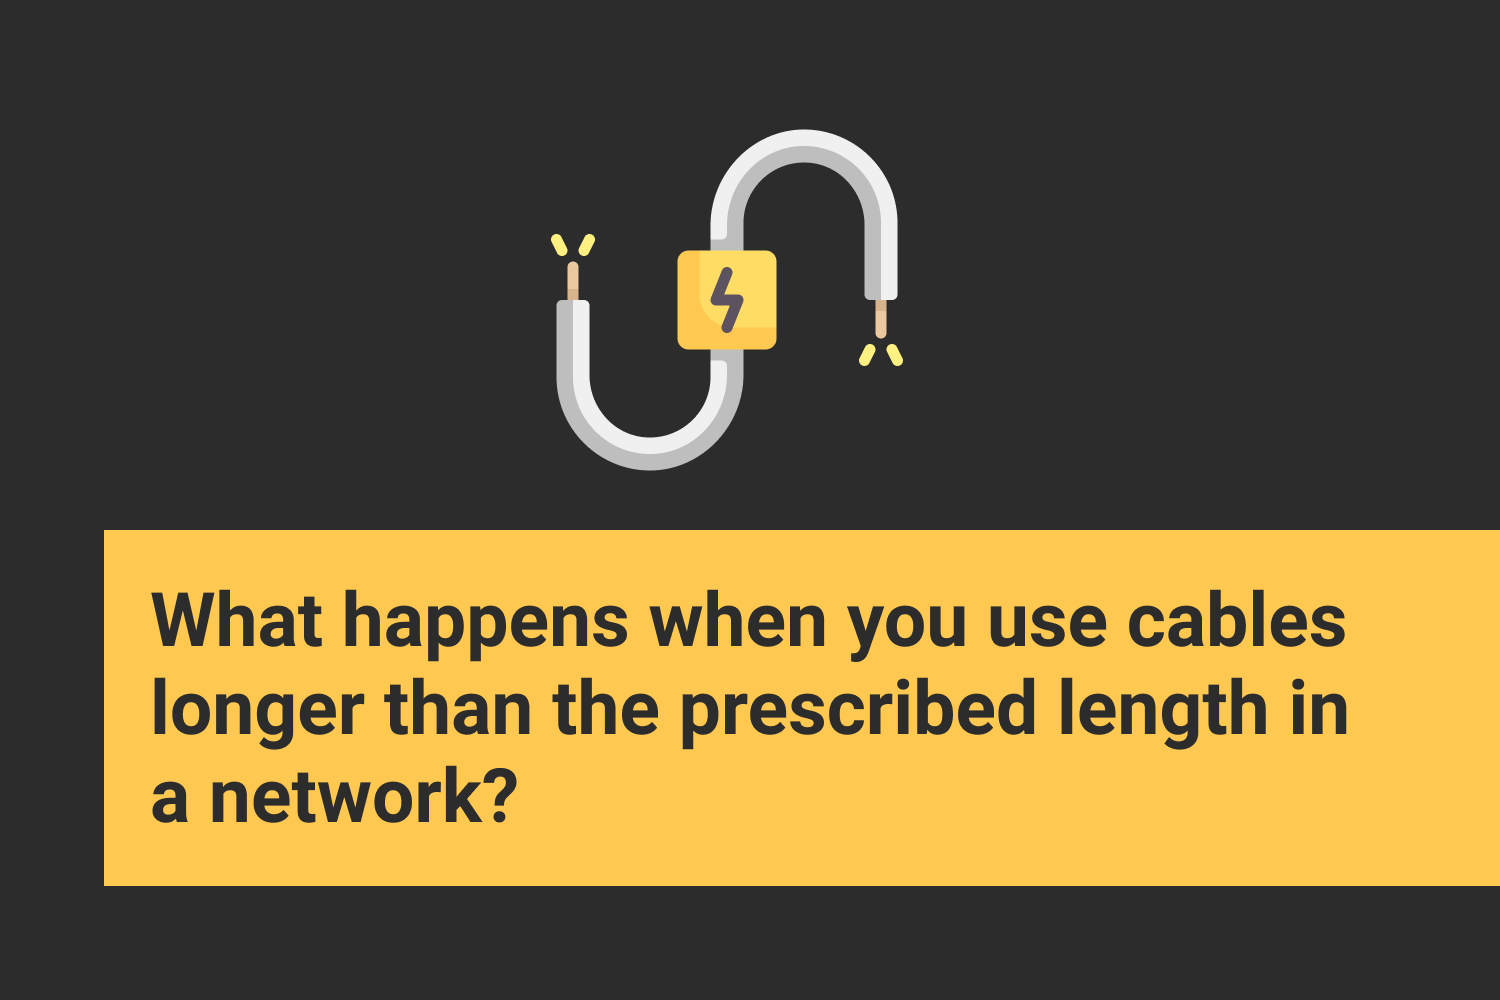 What happens when you use cables longer than the prescribed length in a network?